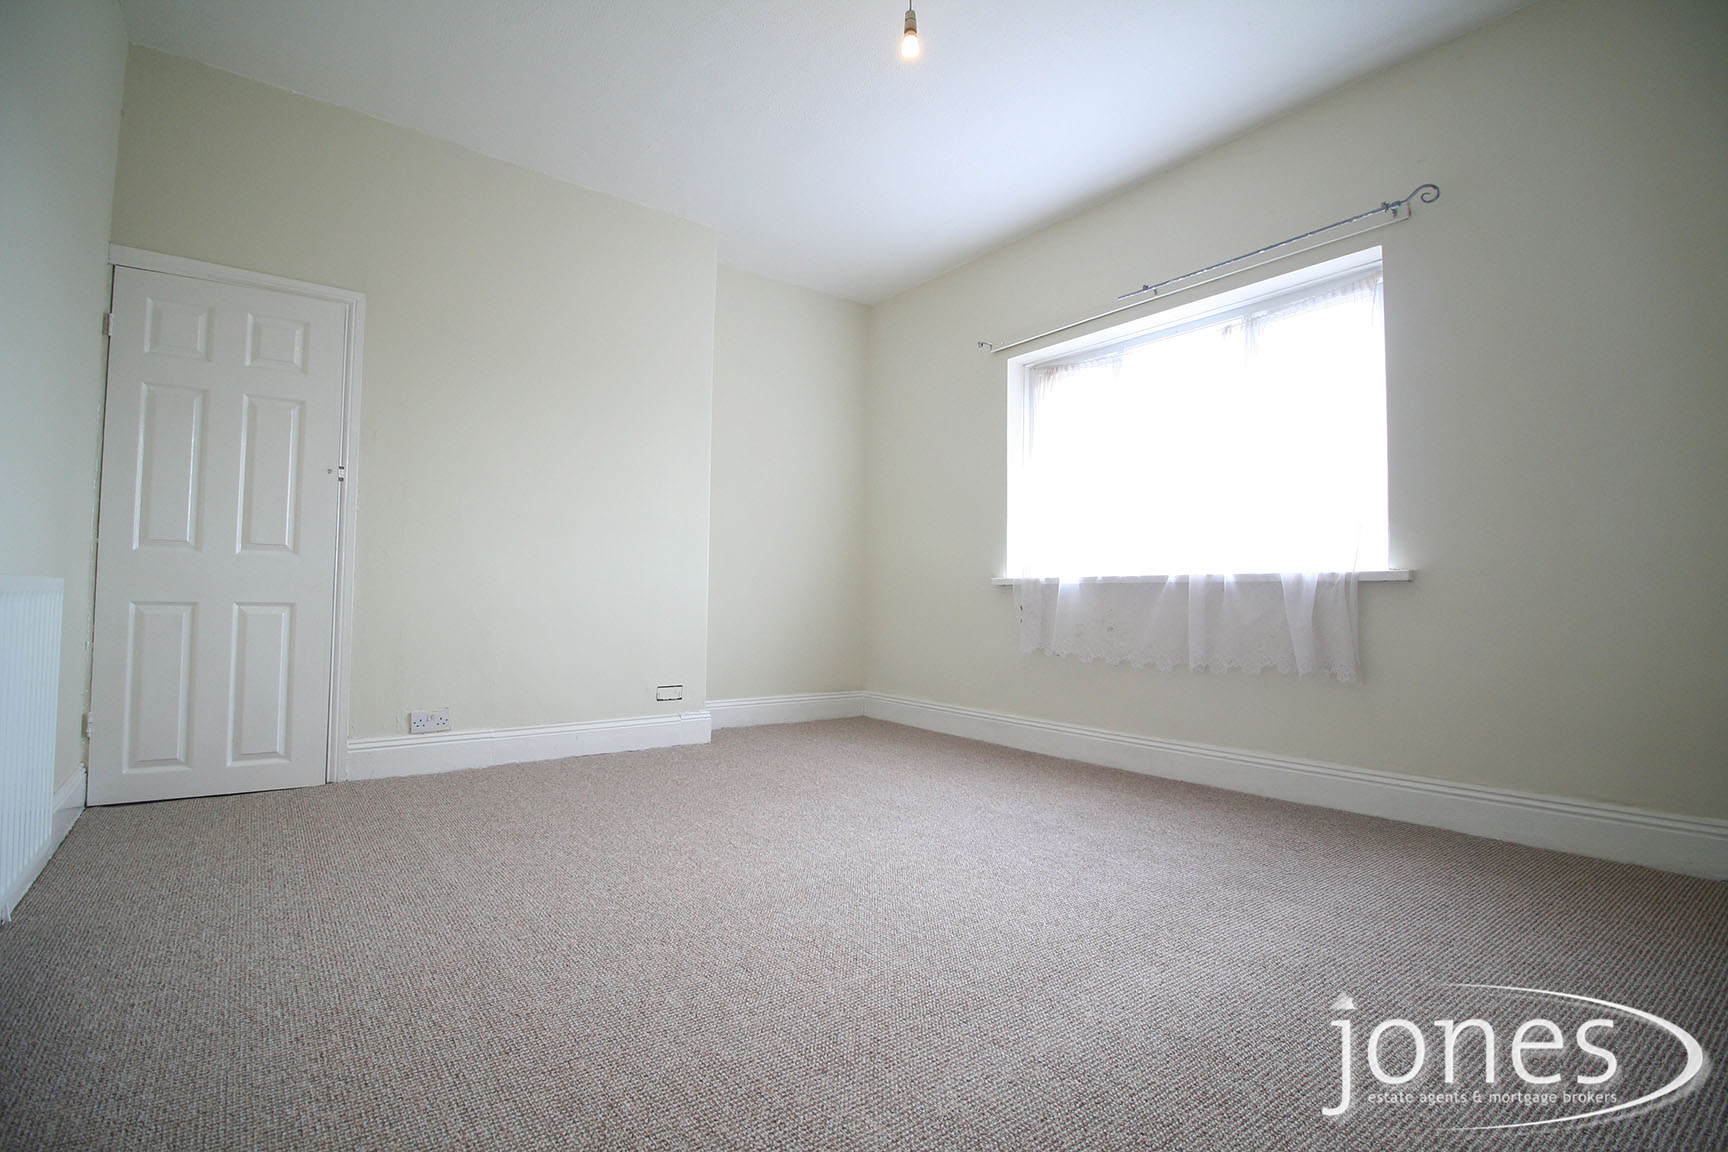 Home for Sale Let - Photo 05 Victoria Road,  Thornaby, Stockton on Tees TS17 6HH